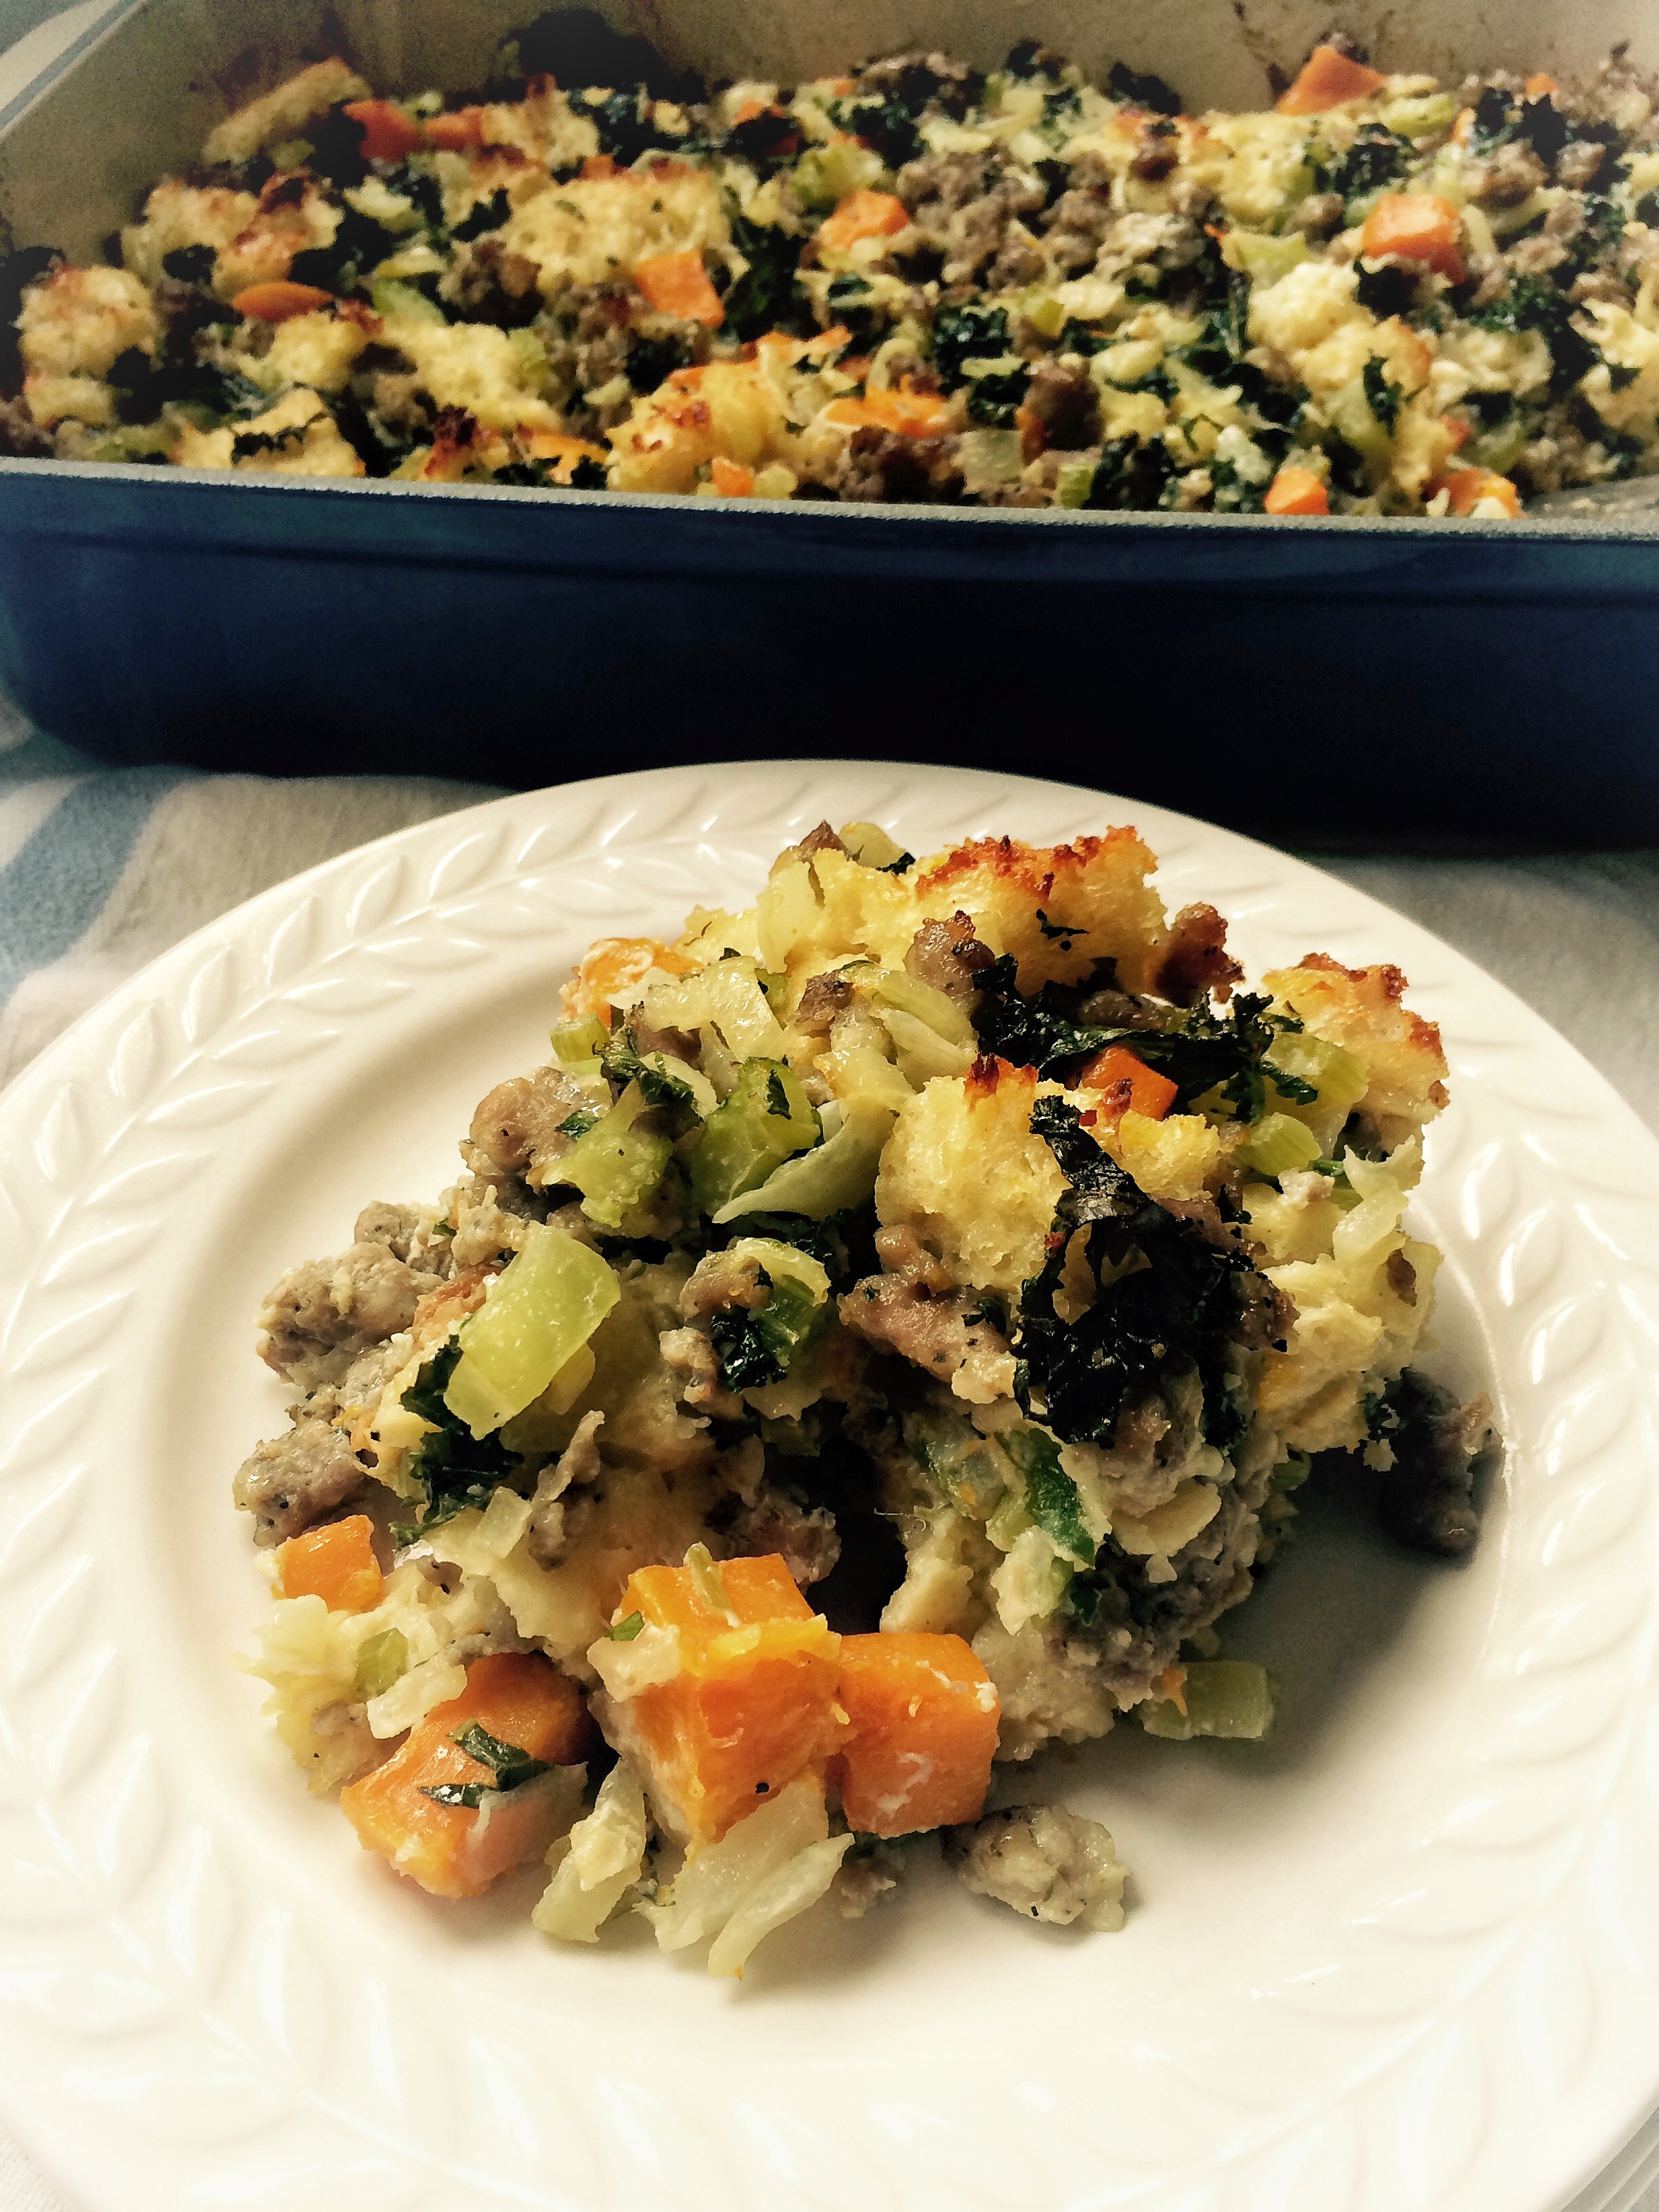 Italian stuffing with kale and butternut squash